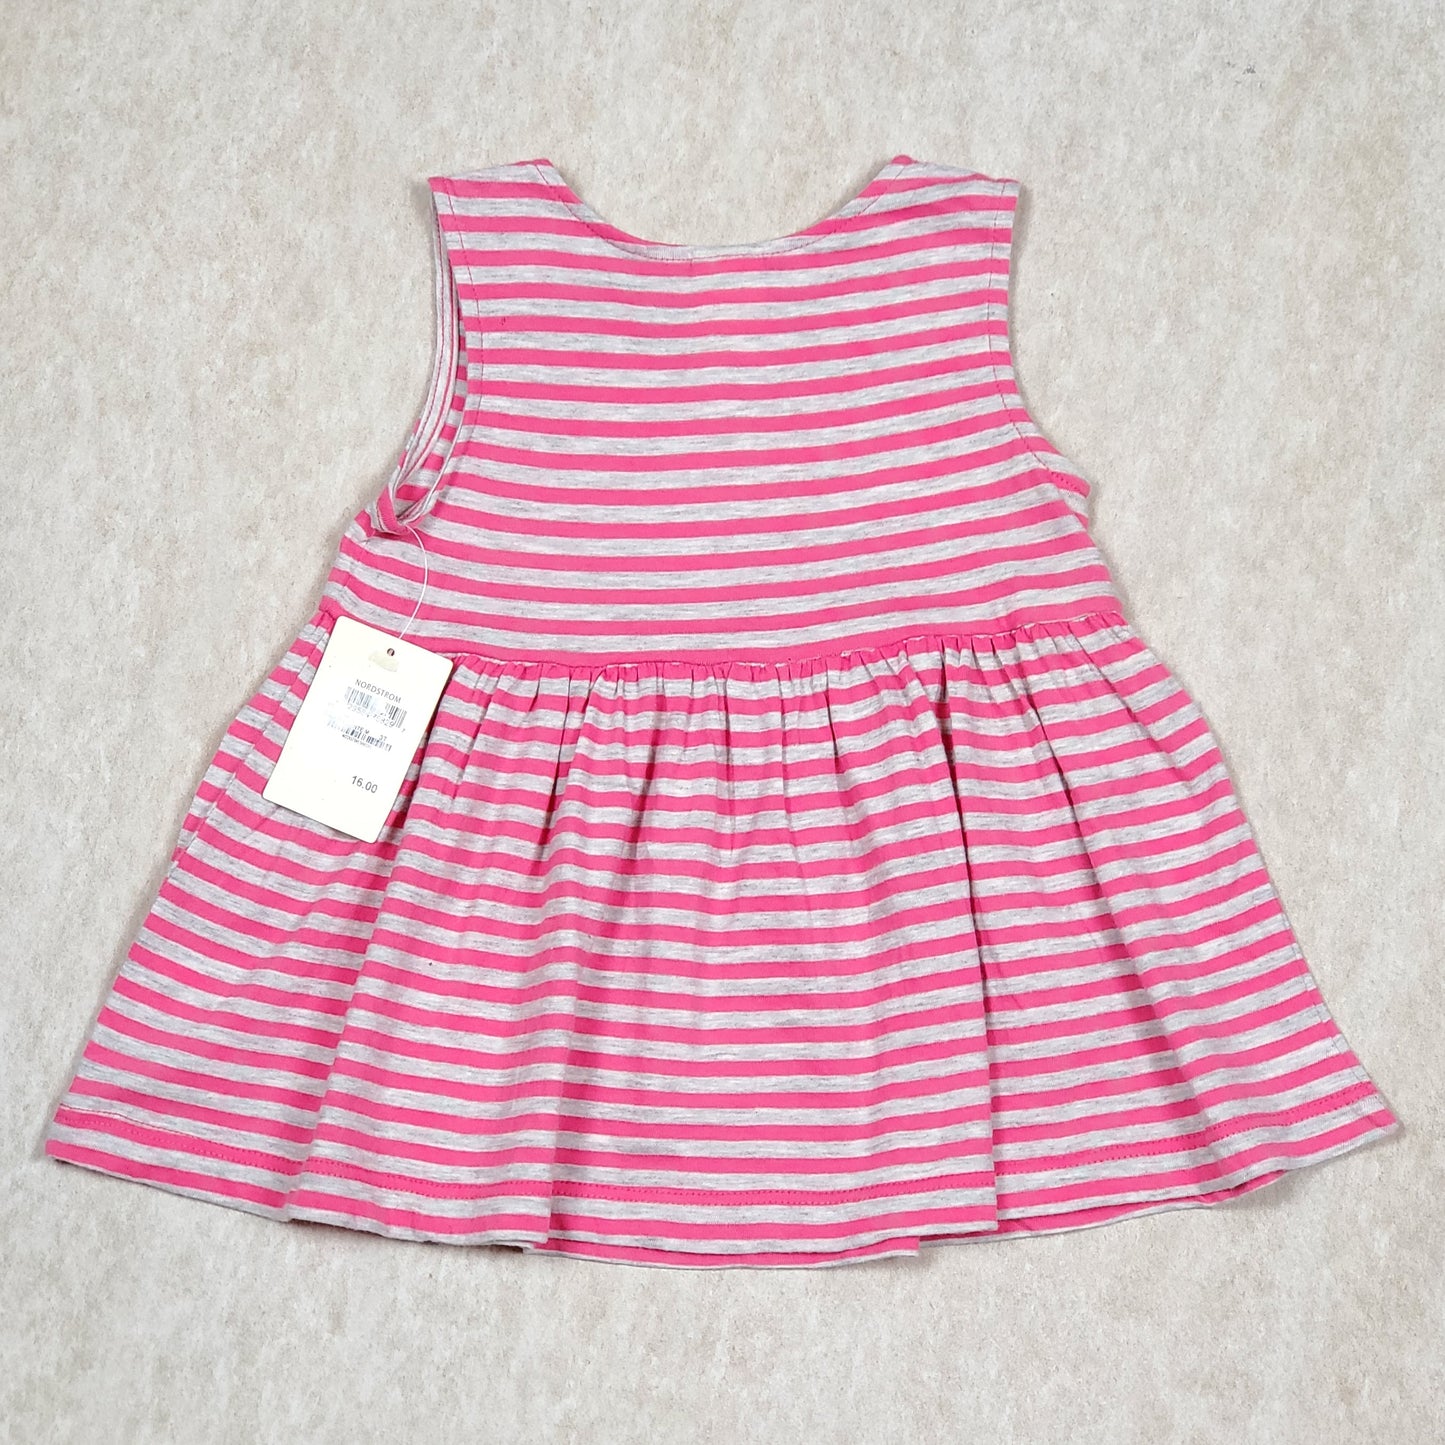 Tucker and Tate Girls Striped Pink Top NWT View 2